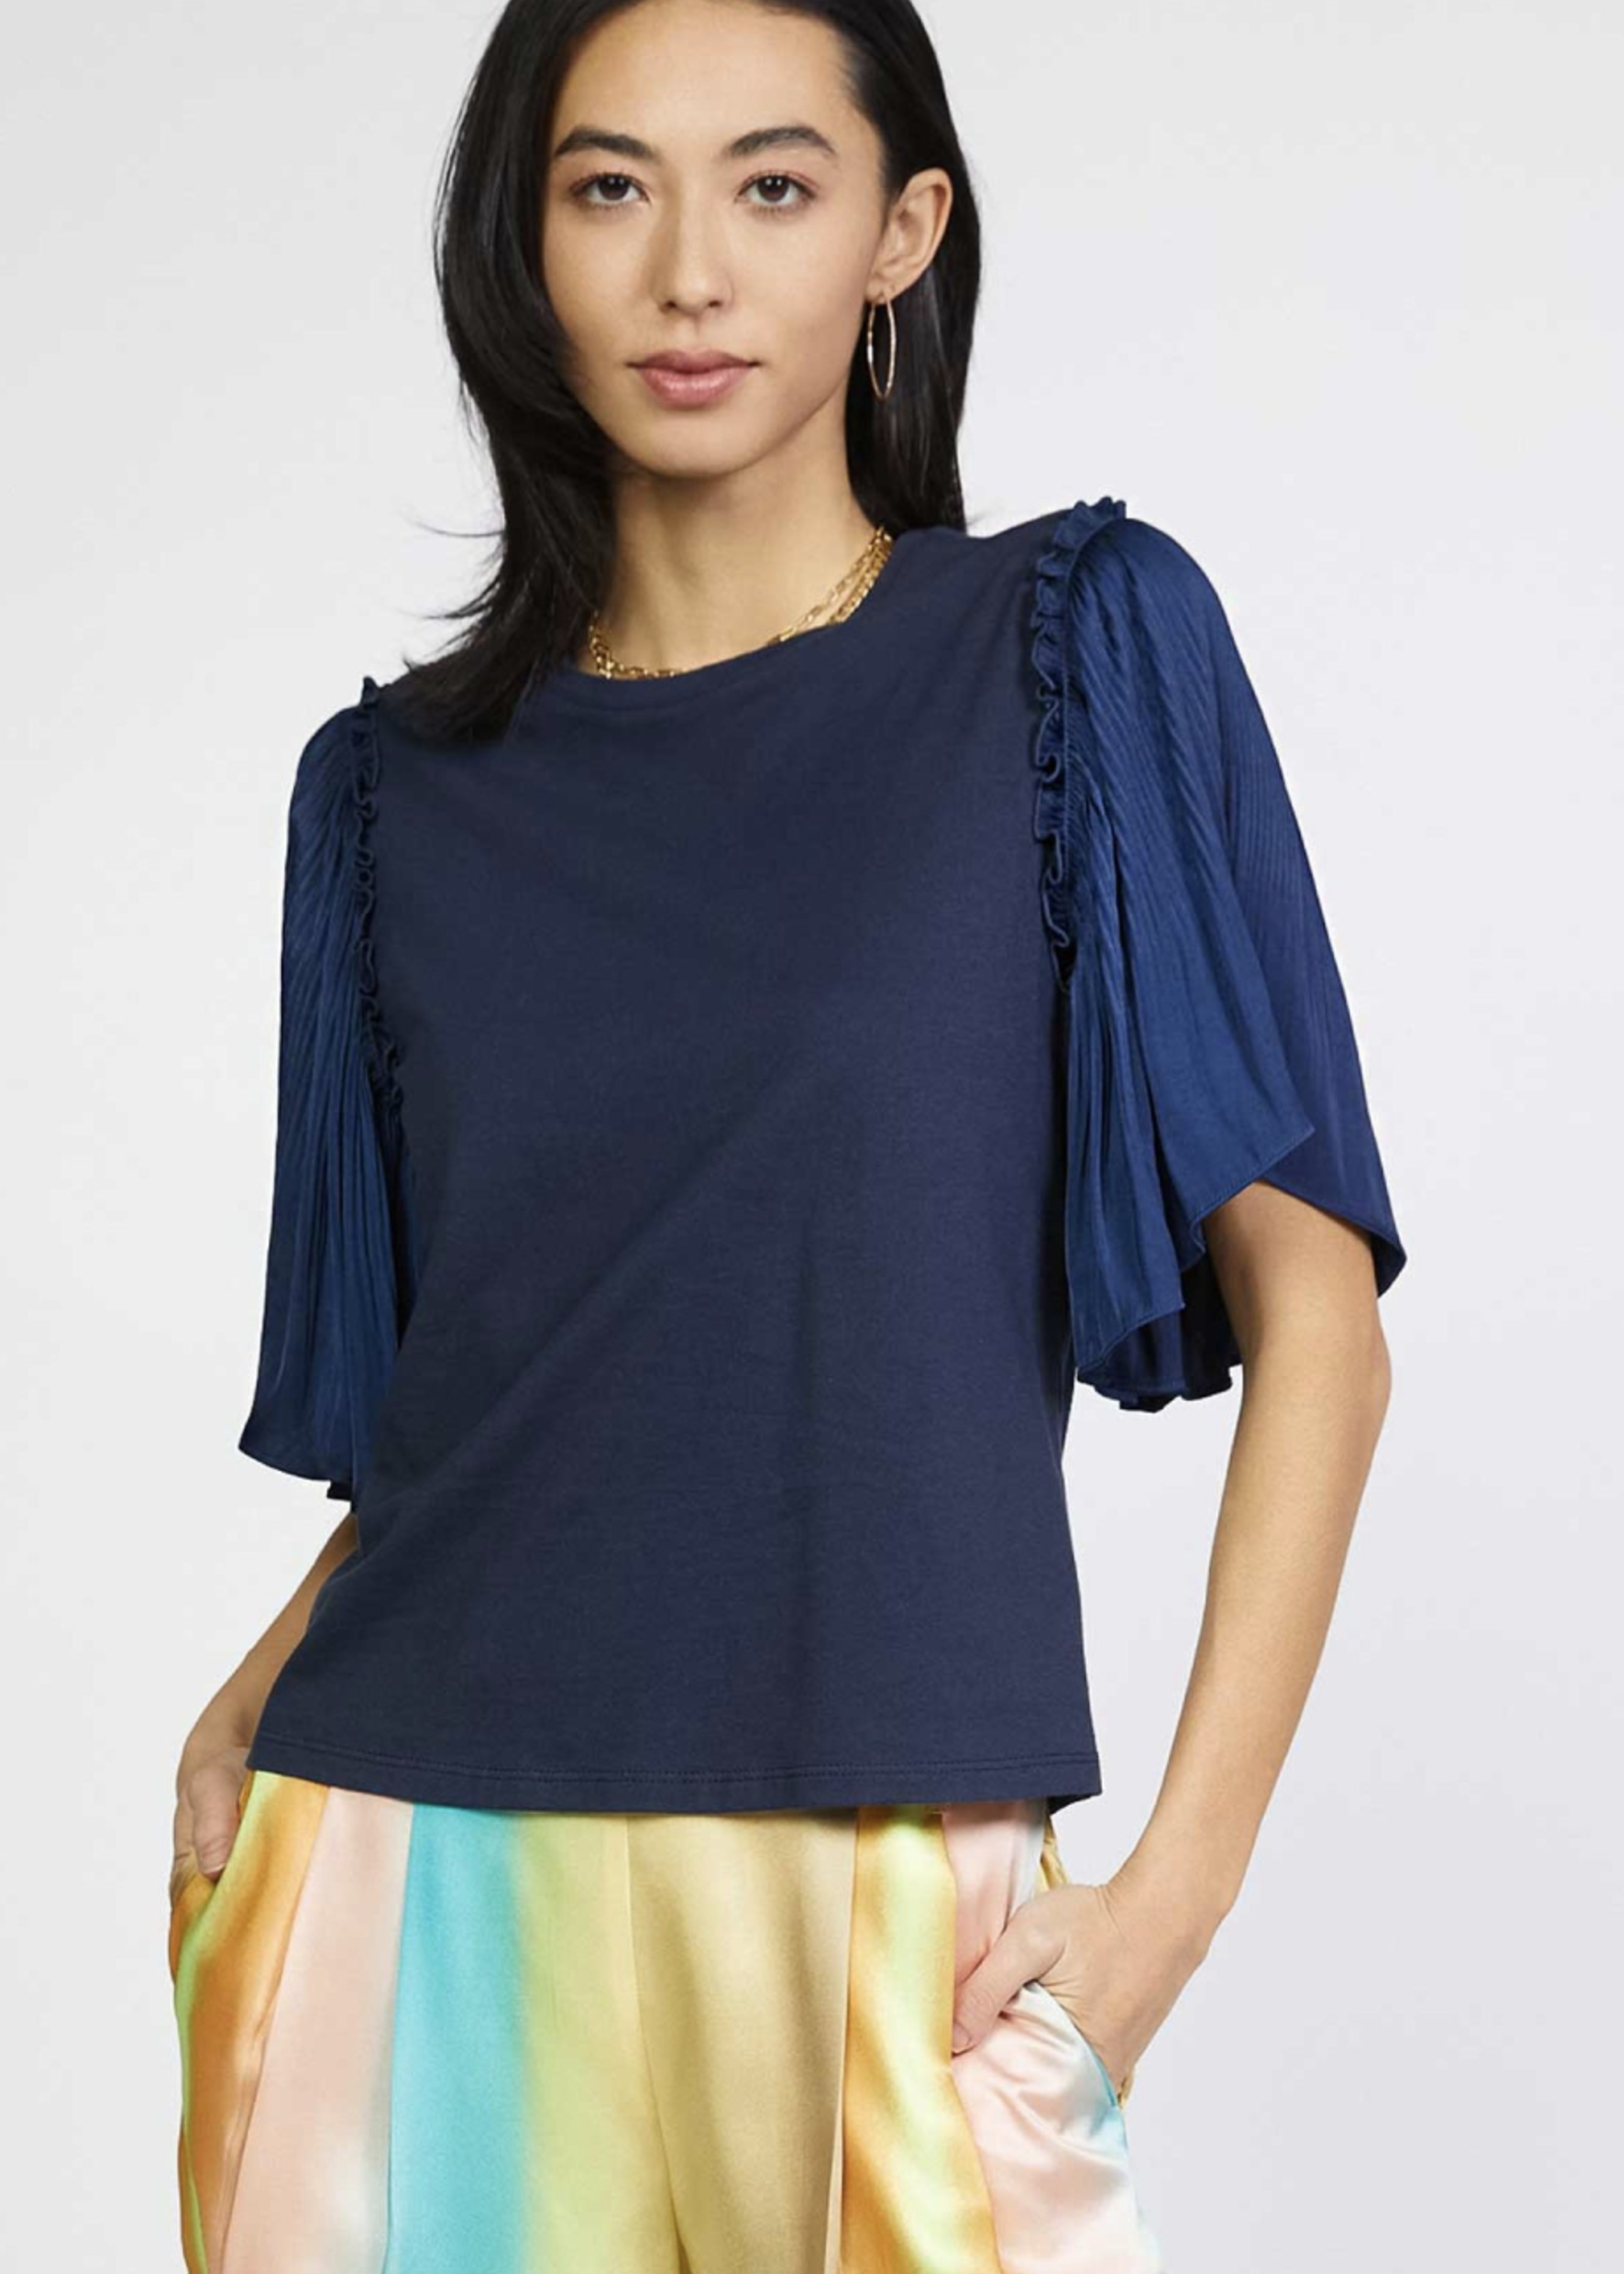 CURRENT AIR CREW NECK T-SHIRT WITH CONTRAST PLEATED FLUTTER SLEEVE